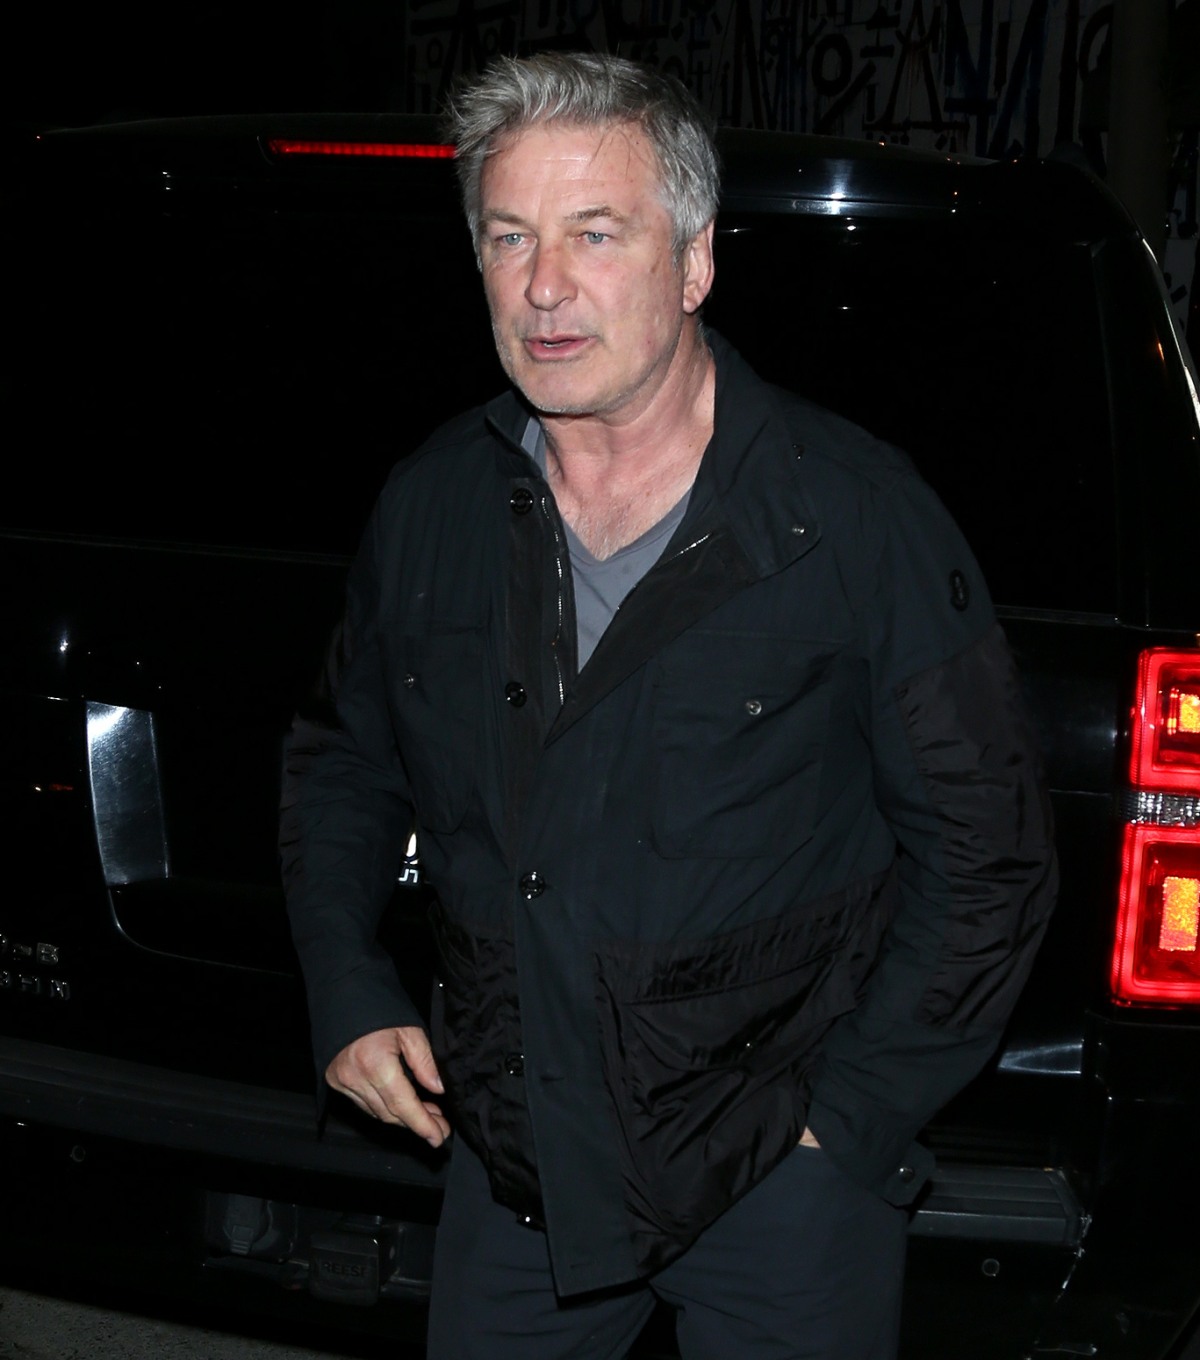 Alec and Hilaria Baldwin chat with owner Craig Susser as they leave Craig's restaurant in West Hollywood